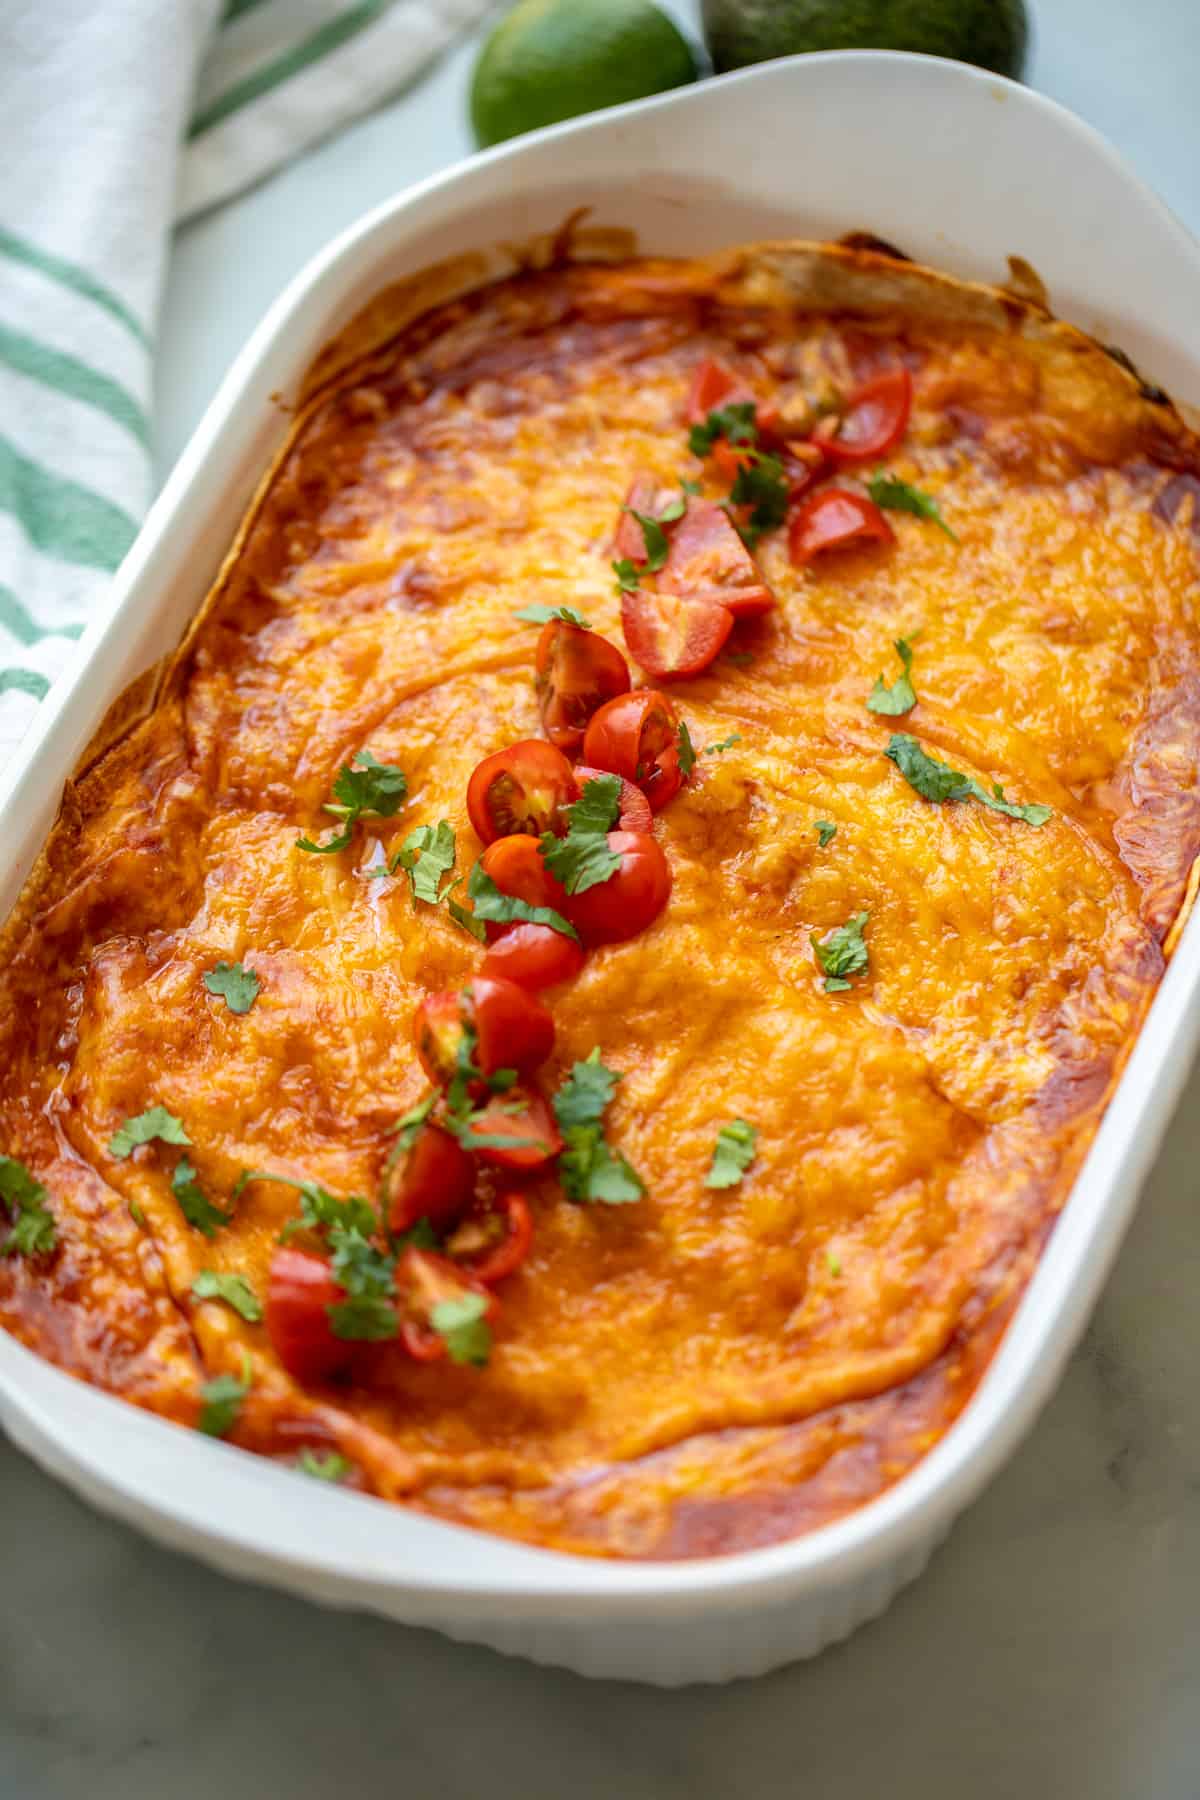 Baked Chicken Enchilada casserole topped with cilantro and grape tomatoes.